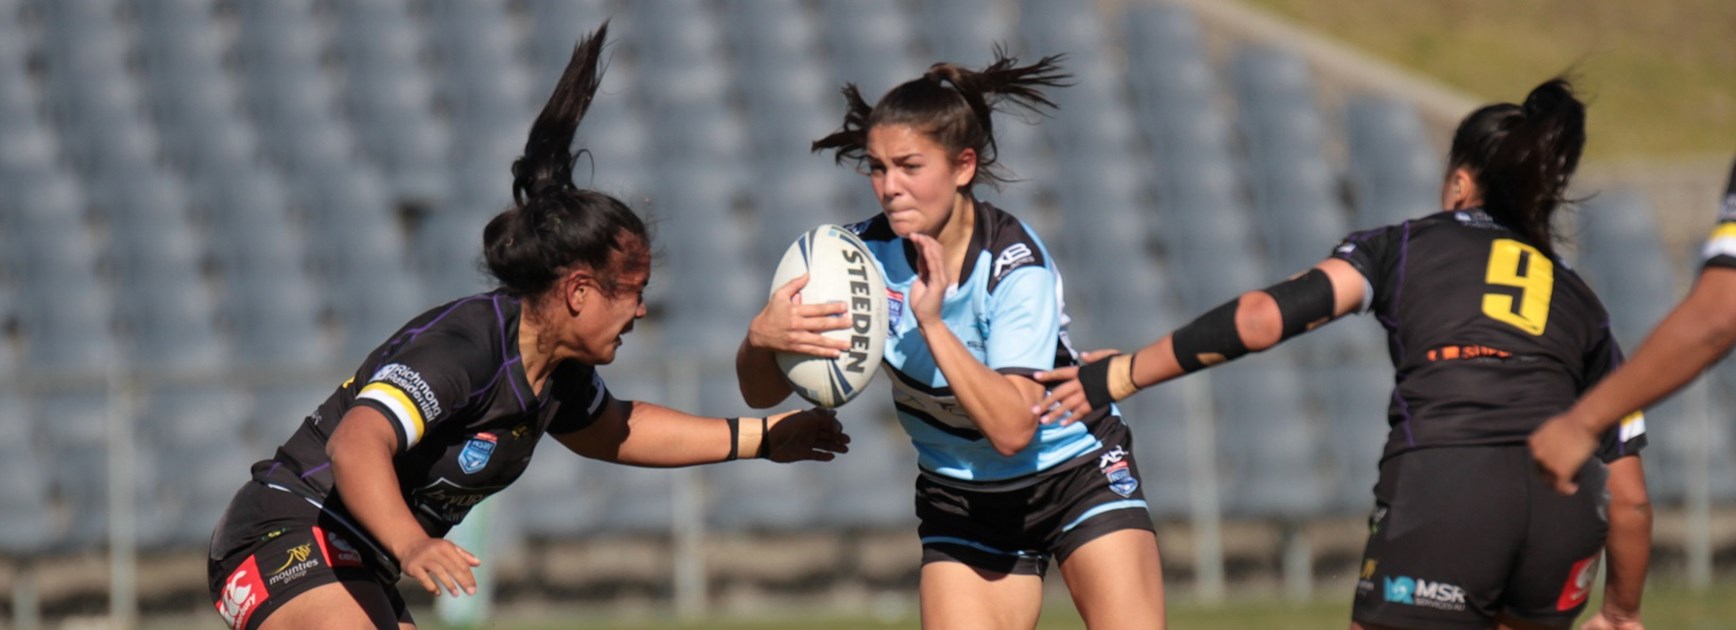 Sharks inviting new players for Women’s team in 2020